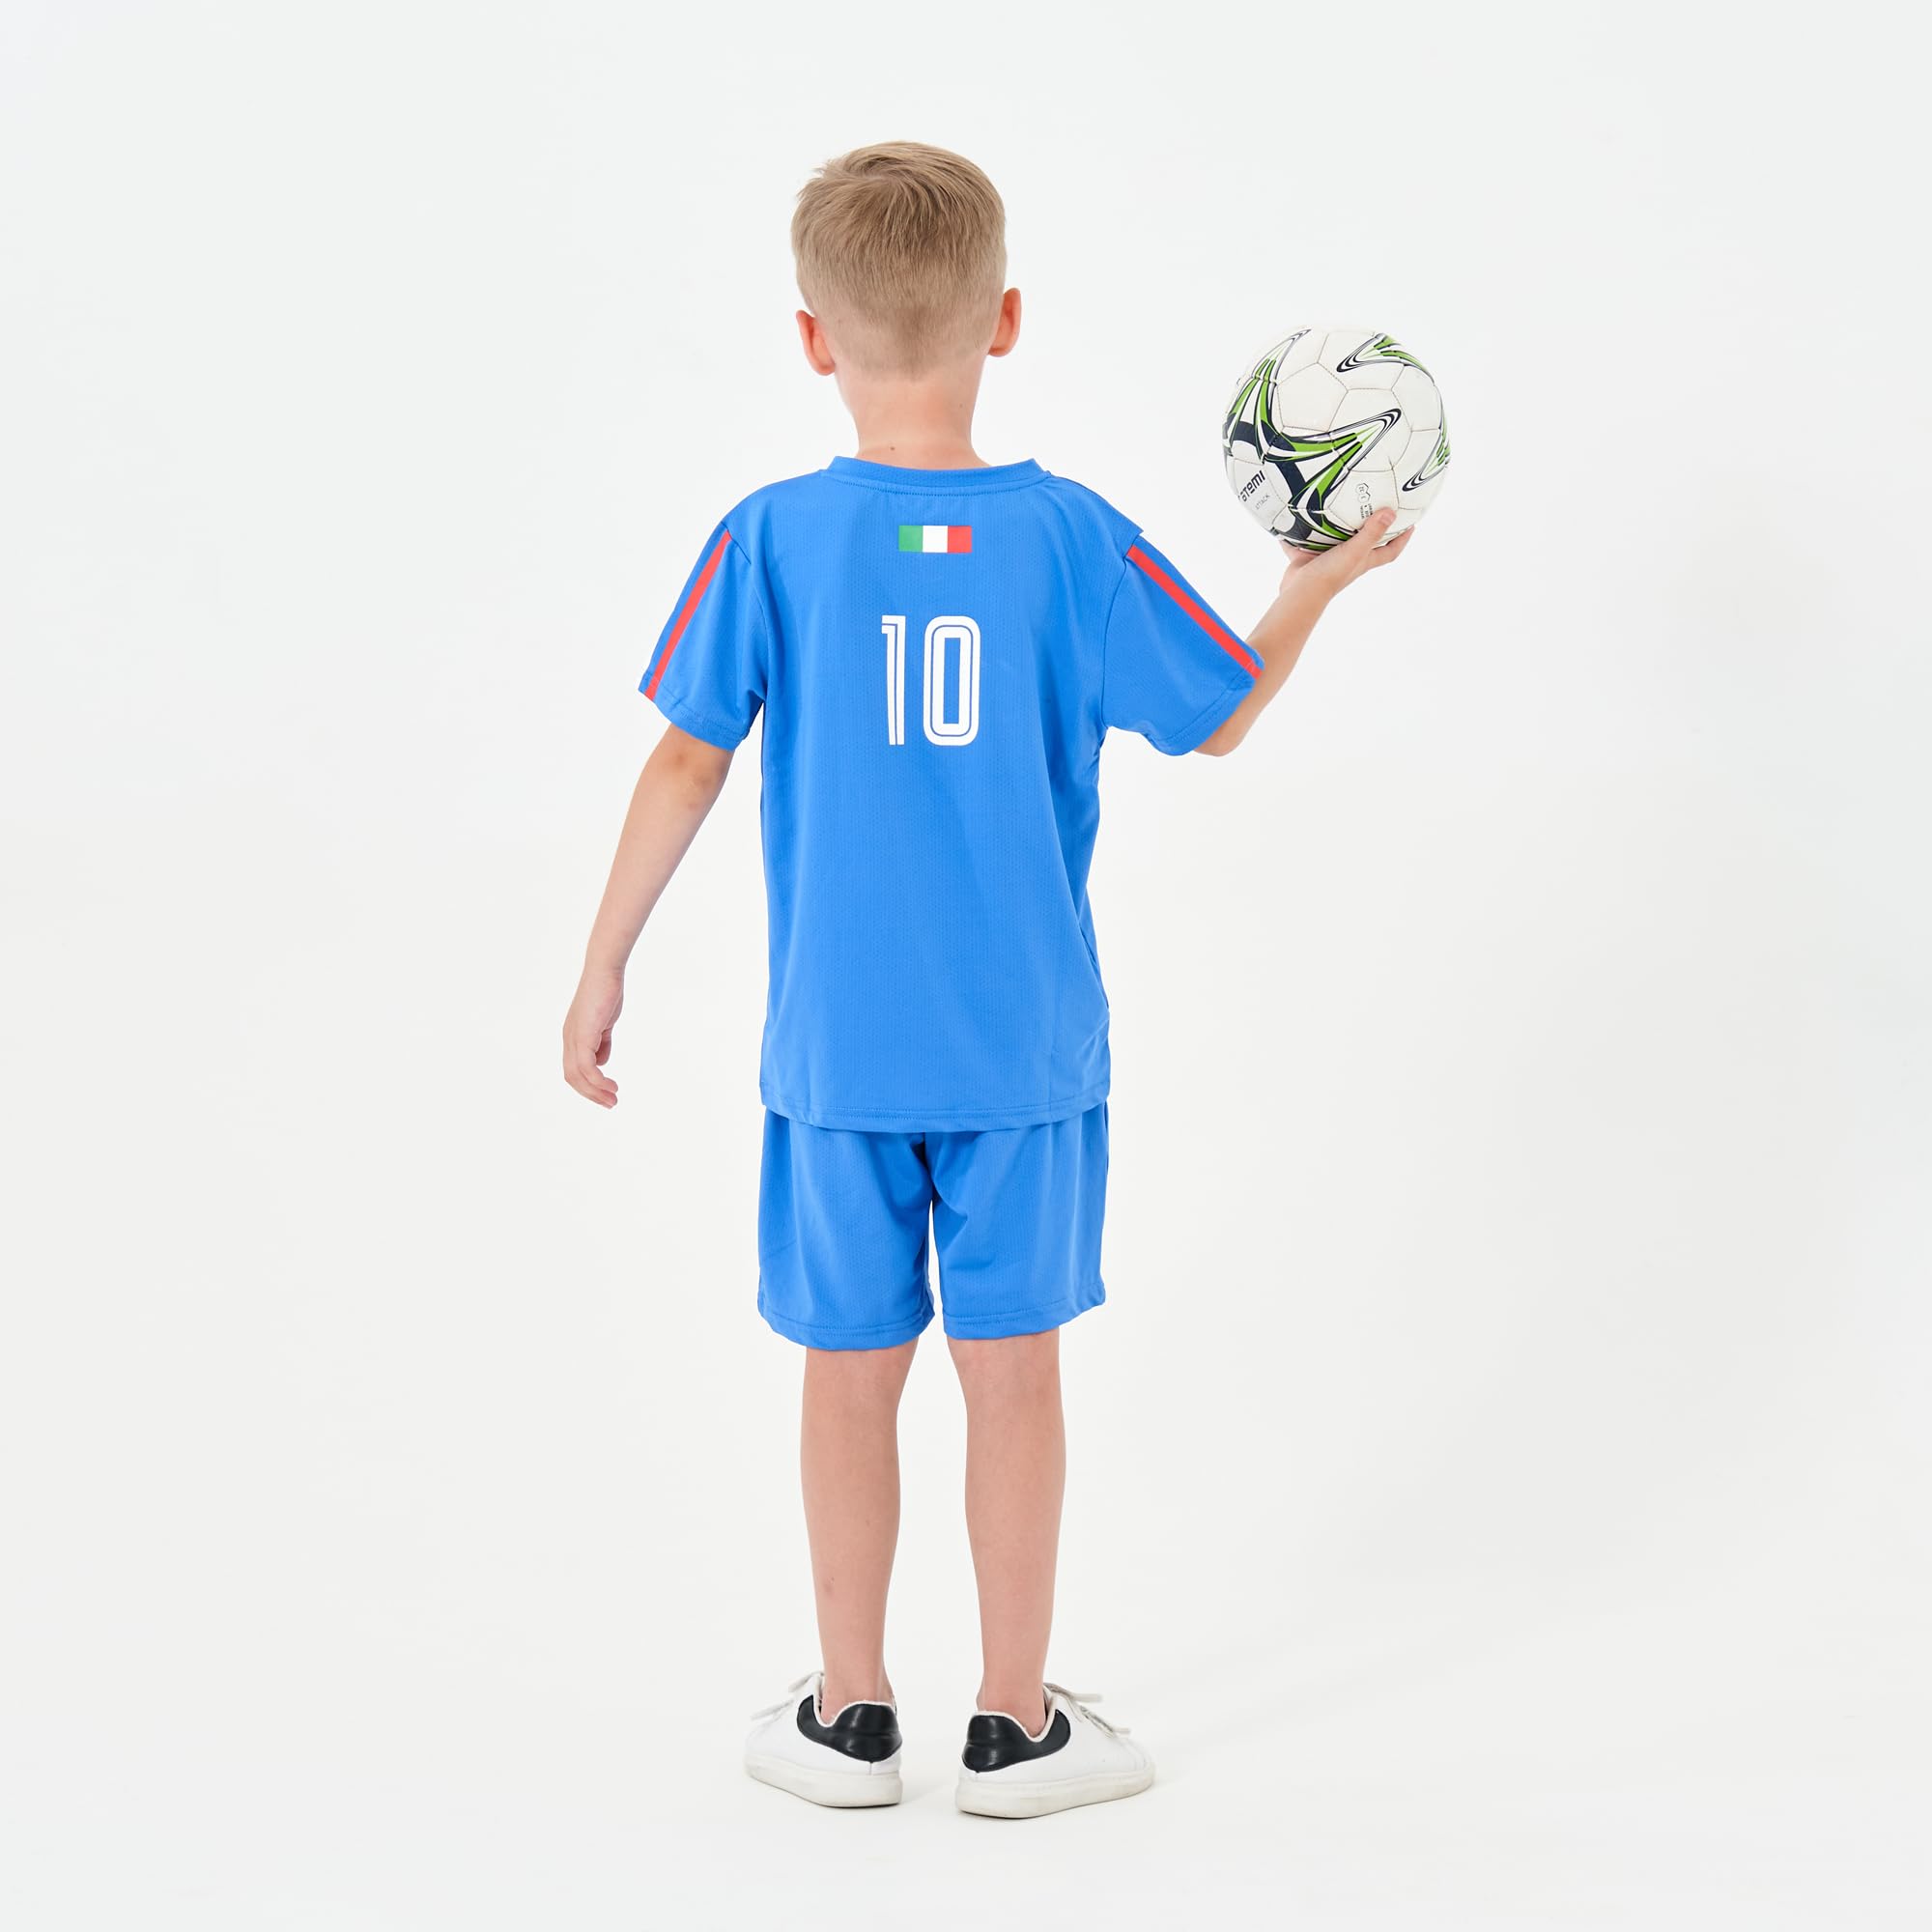 BDONDON Soccer Jerseys for Kids Boys & Girls Youth Soccer Practice Jersey Outfits Toddler Football Training Shirt Uniforms